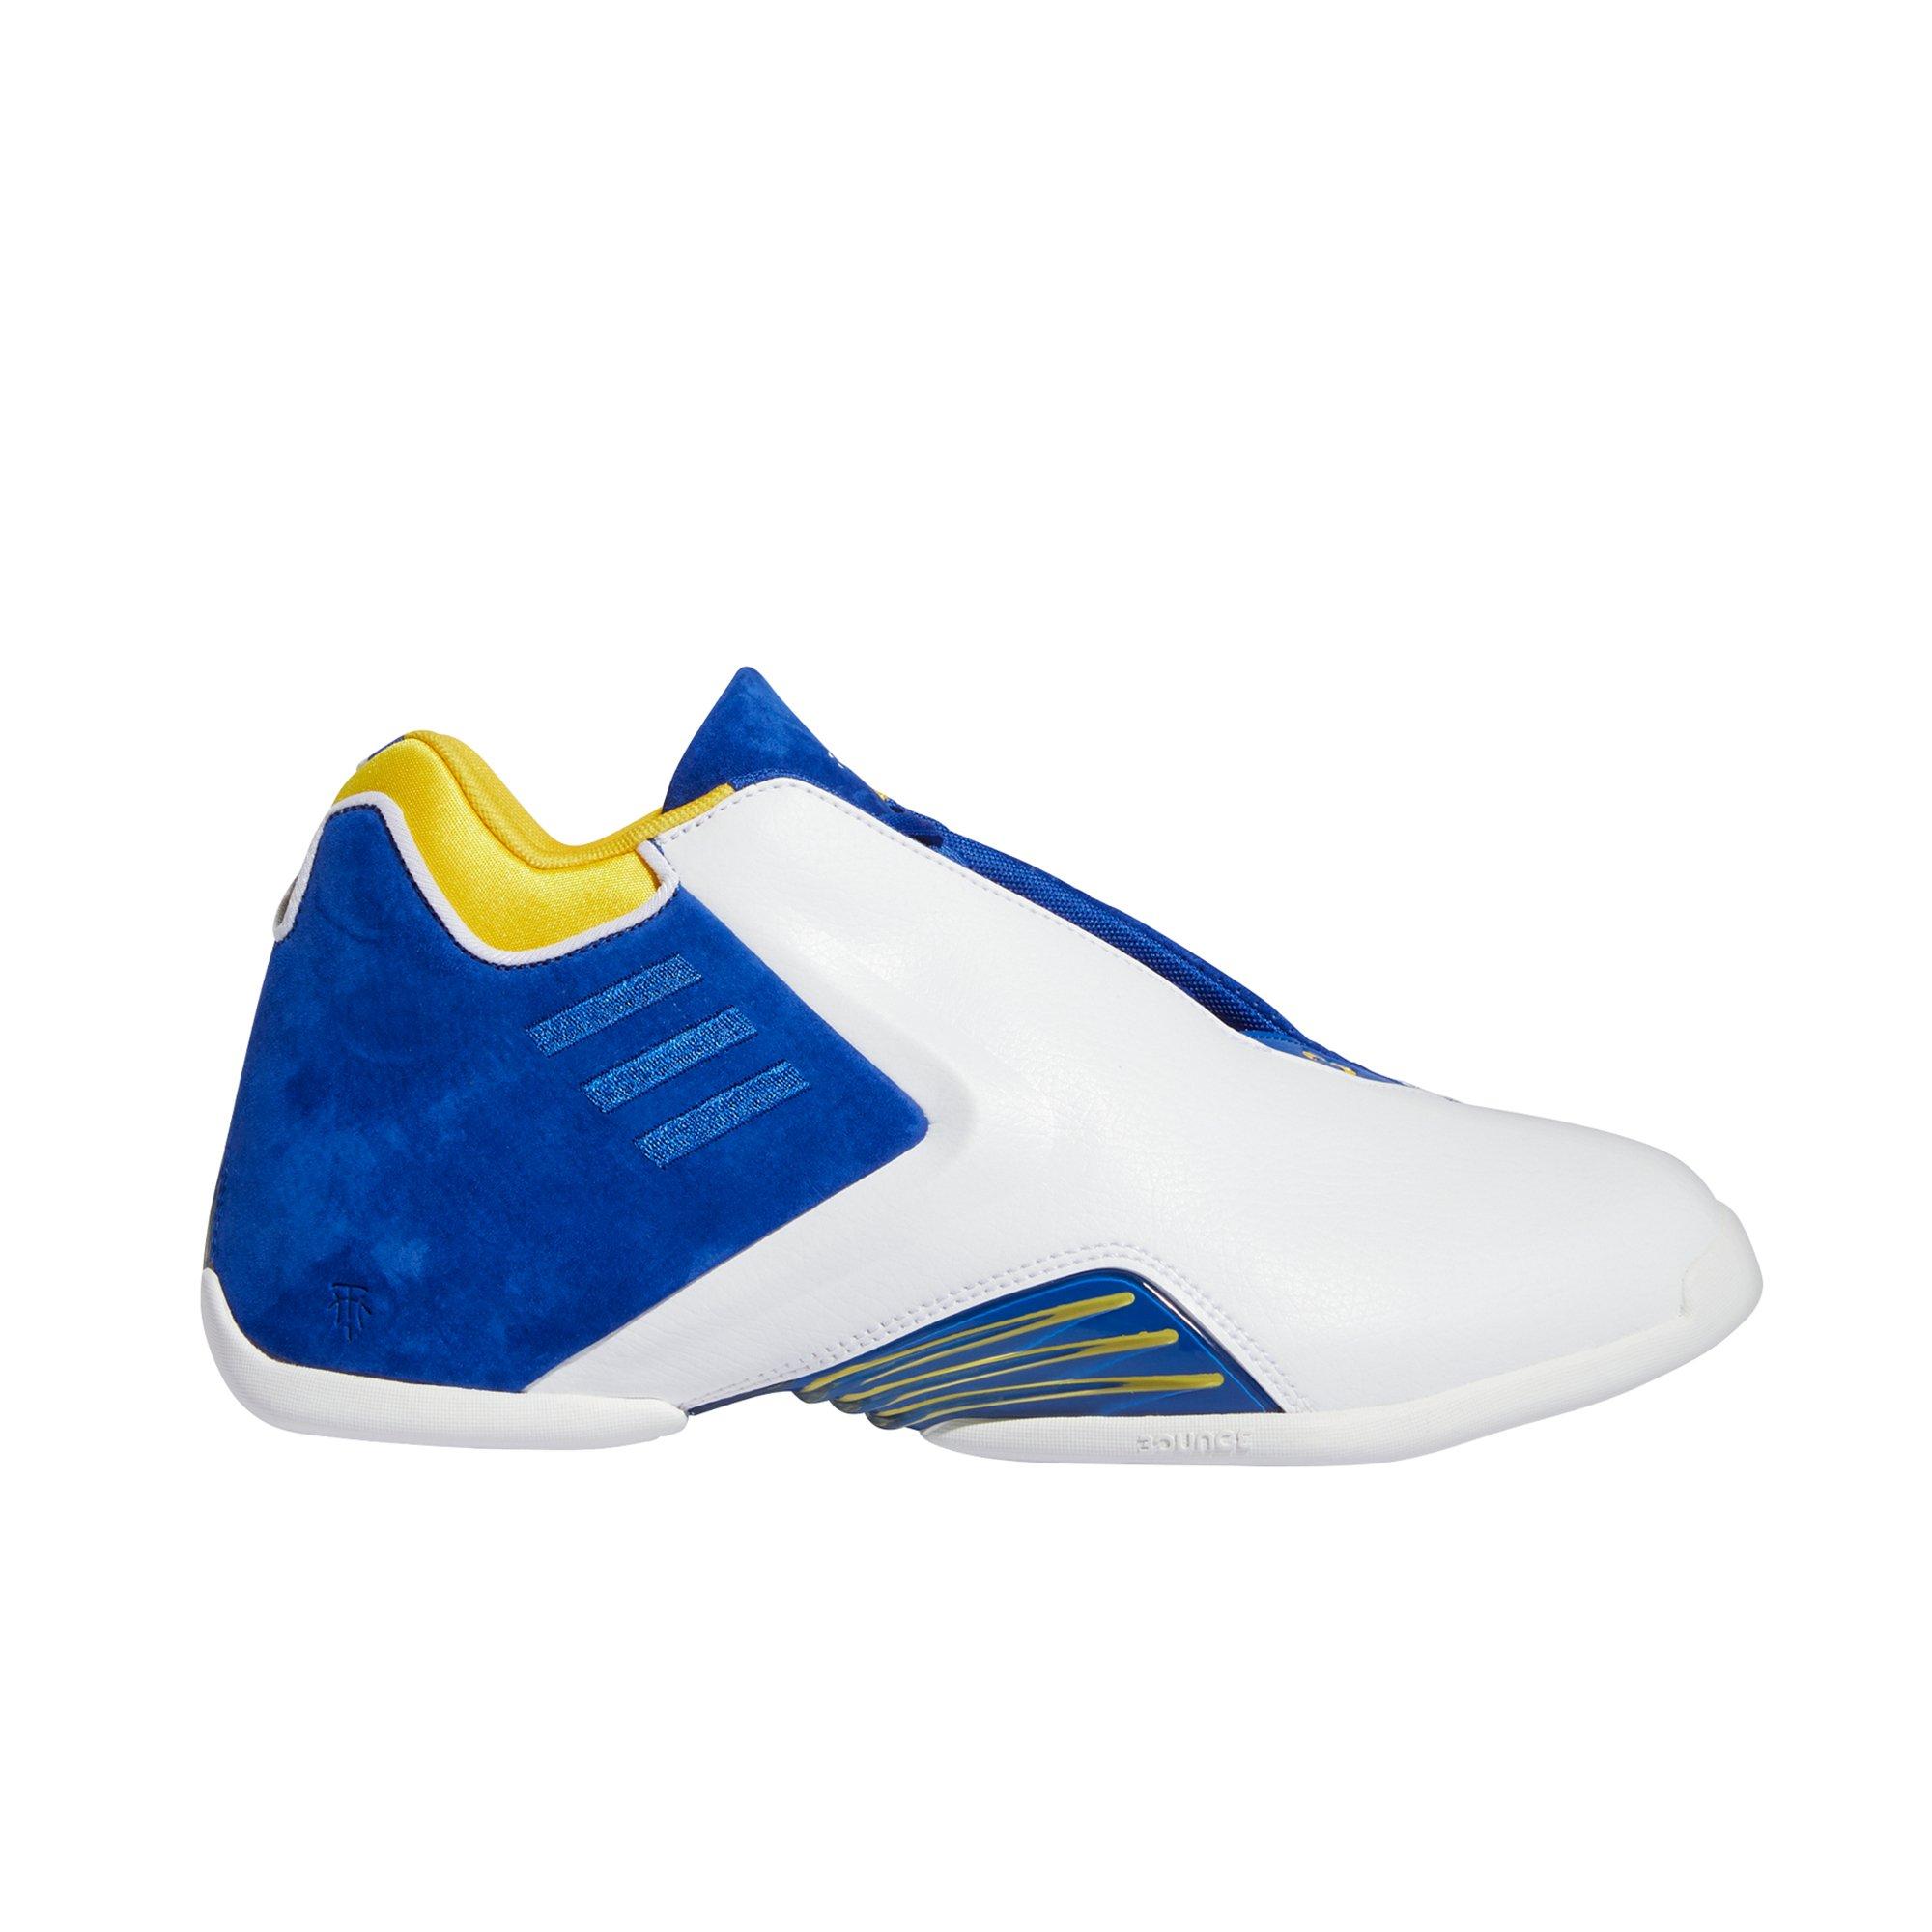 Adidas White Blue Yellow Shoes | vlr.eng.br